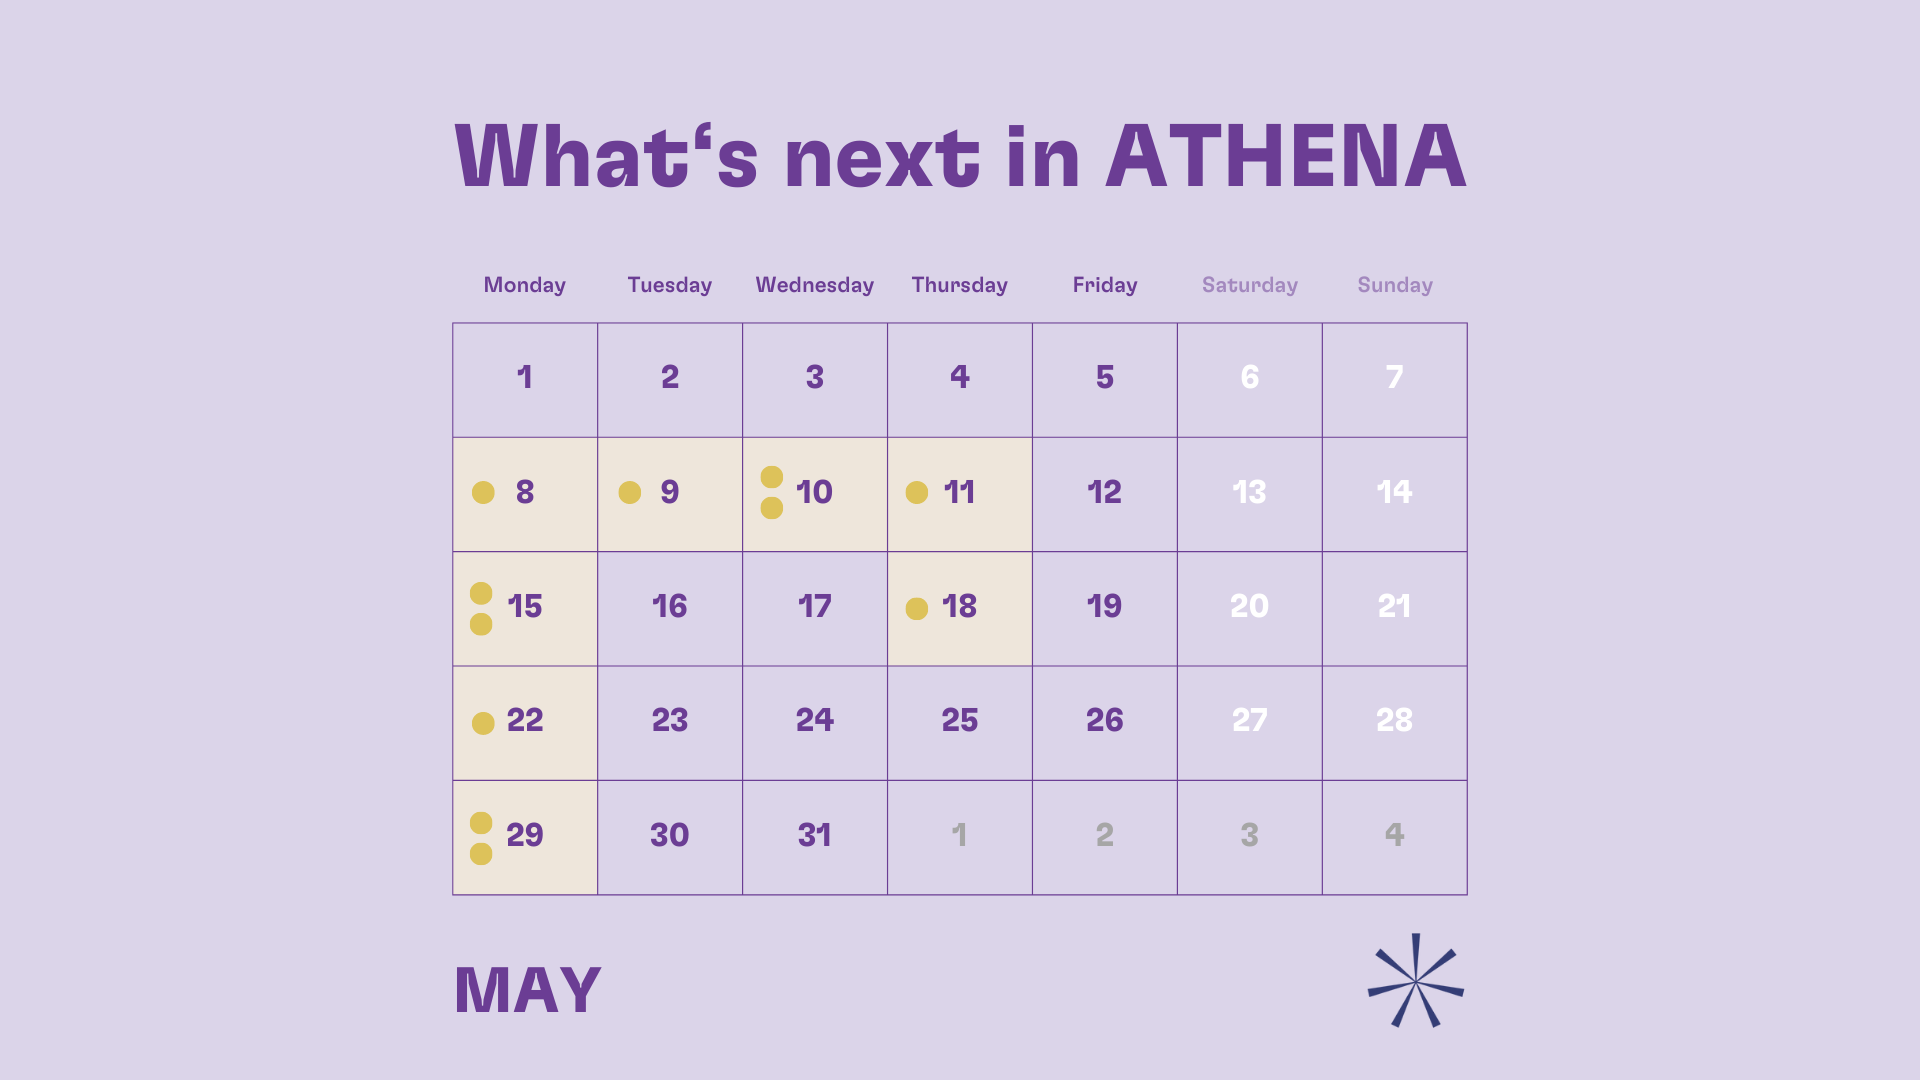 What‘s next in ATHENA